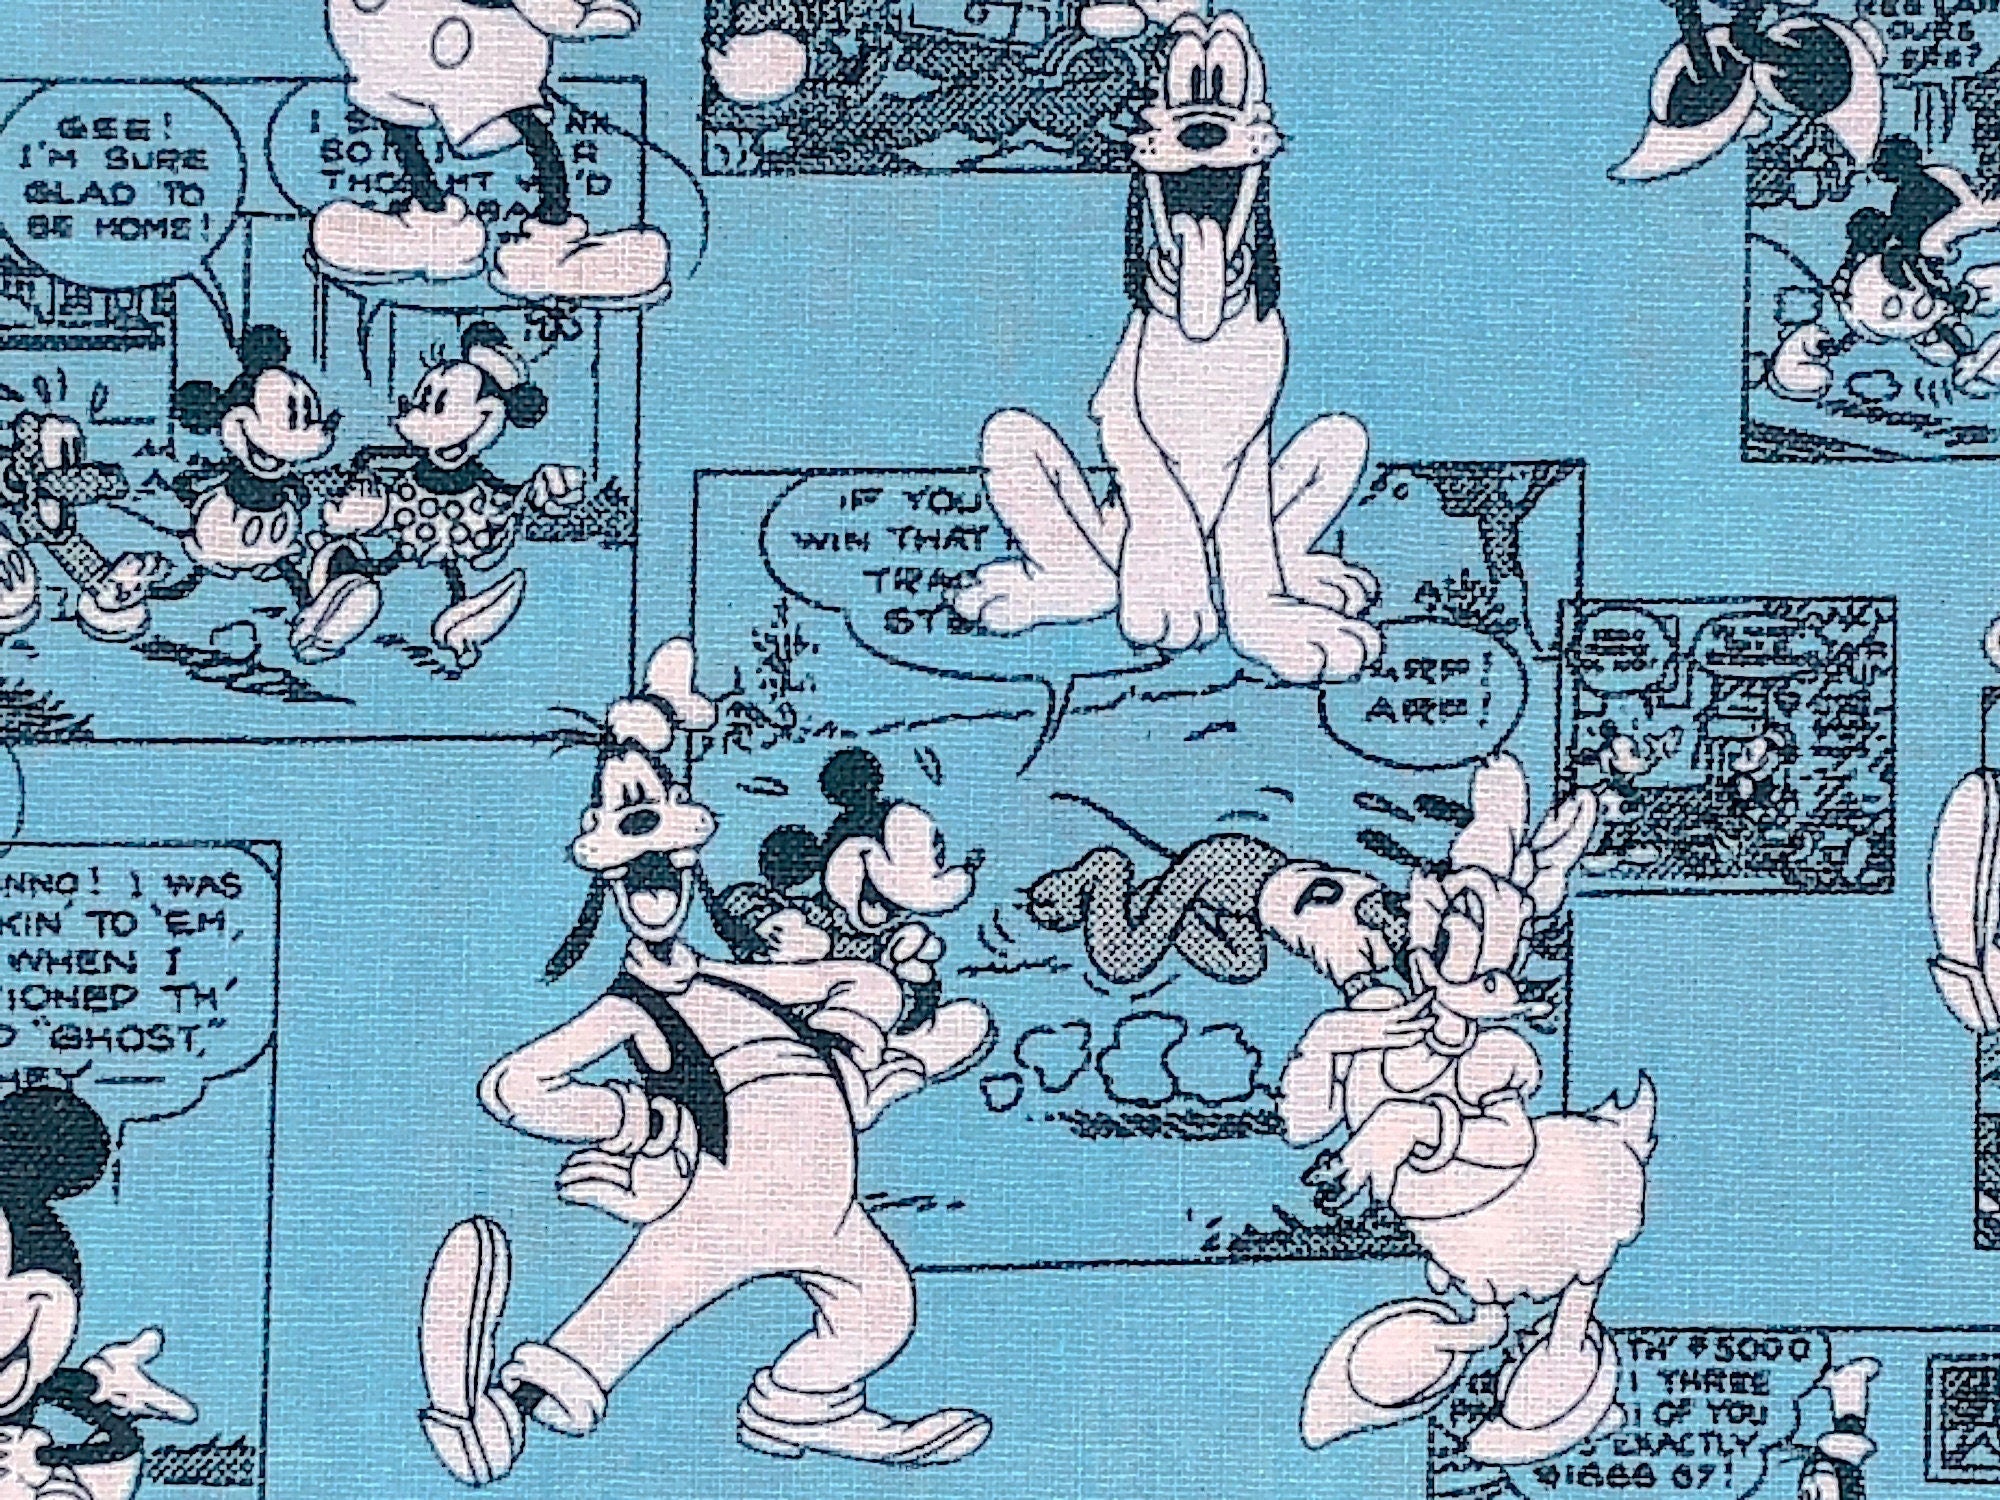 Close up of Pluto, Goofy and more.